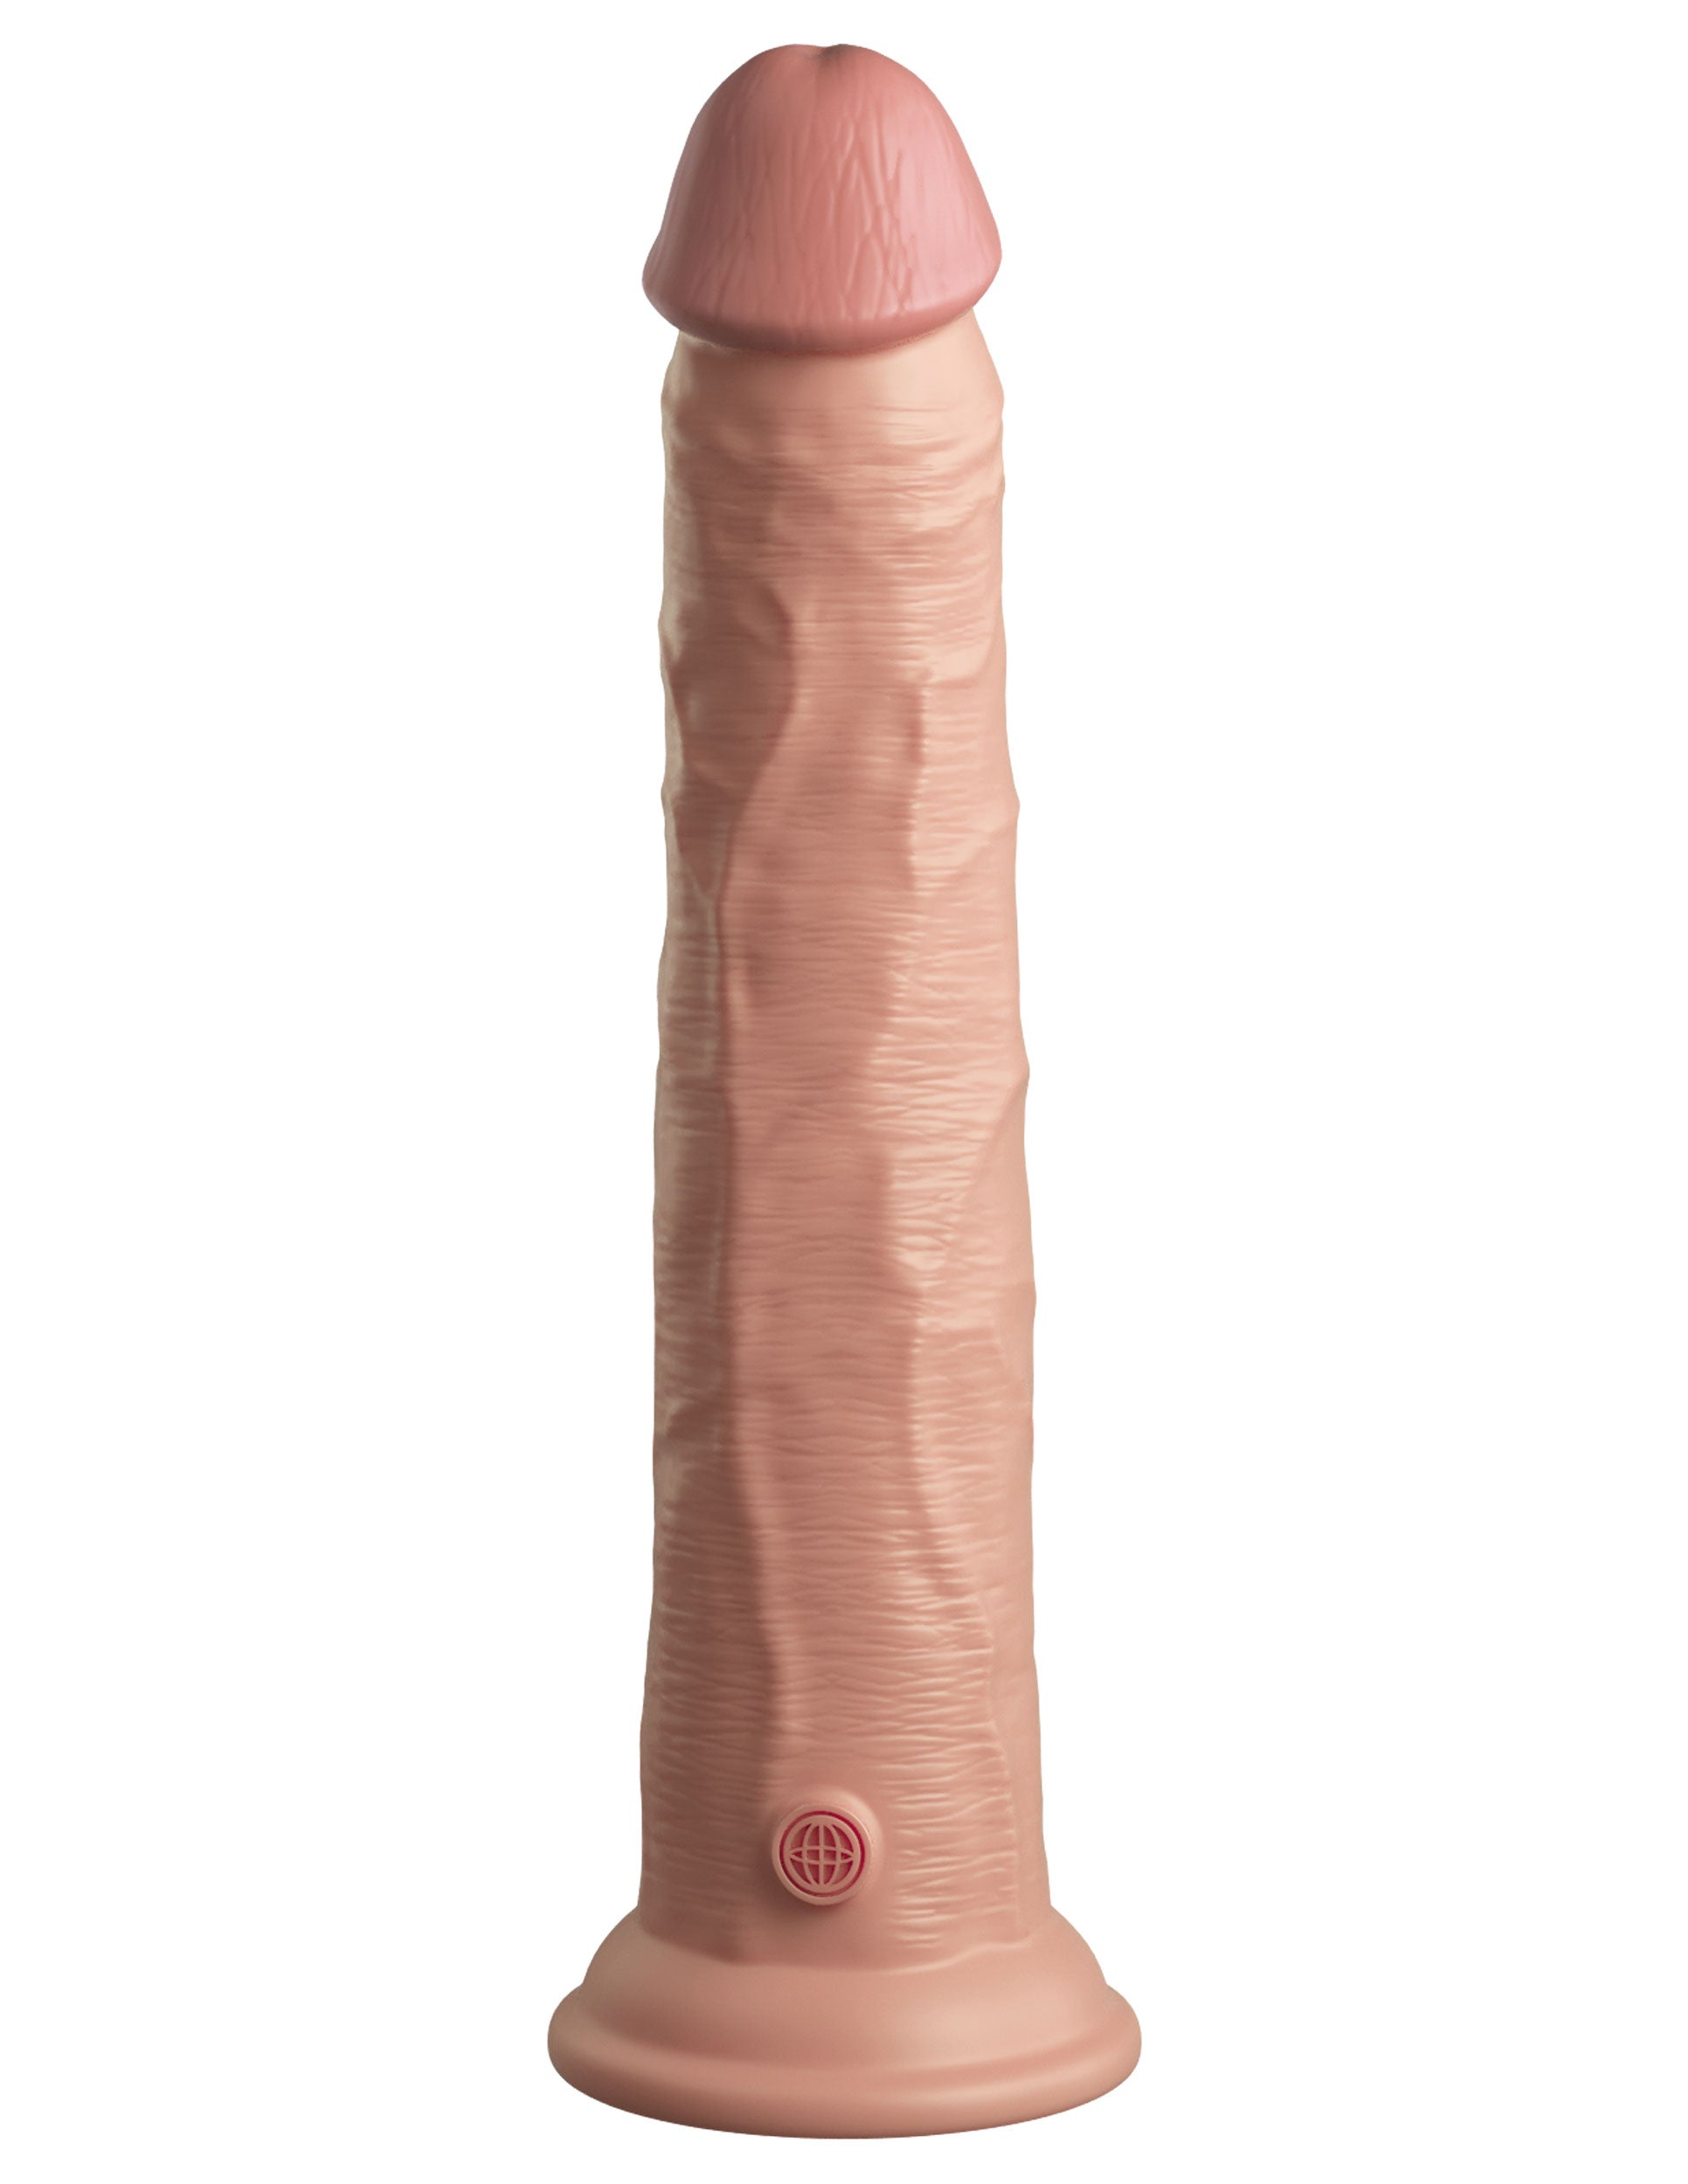 King Cock Elite 8 Inch Dual Density Silicone Cock 10 Inch